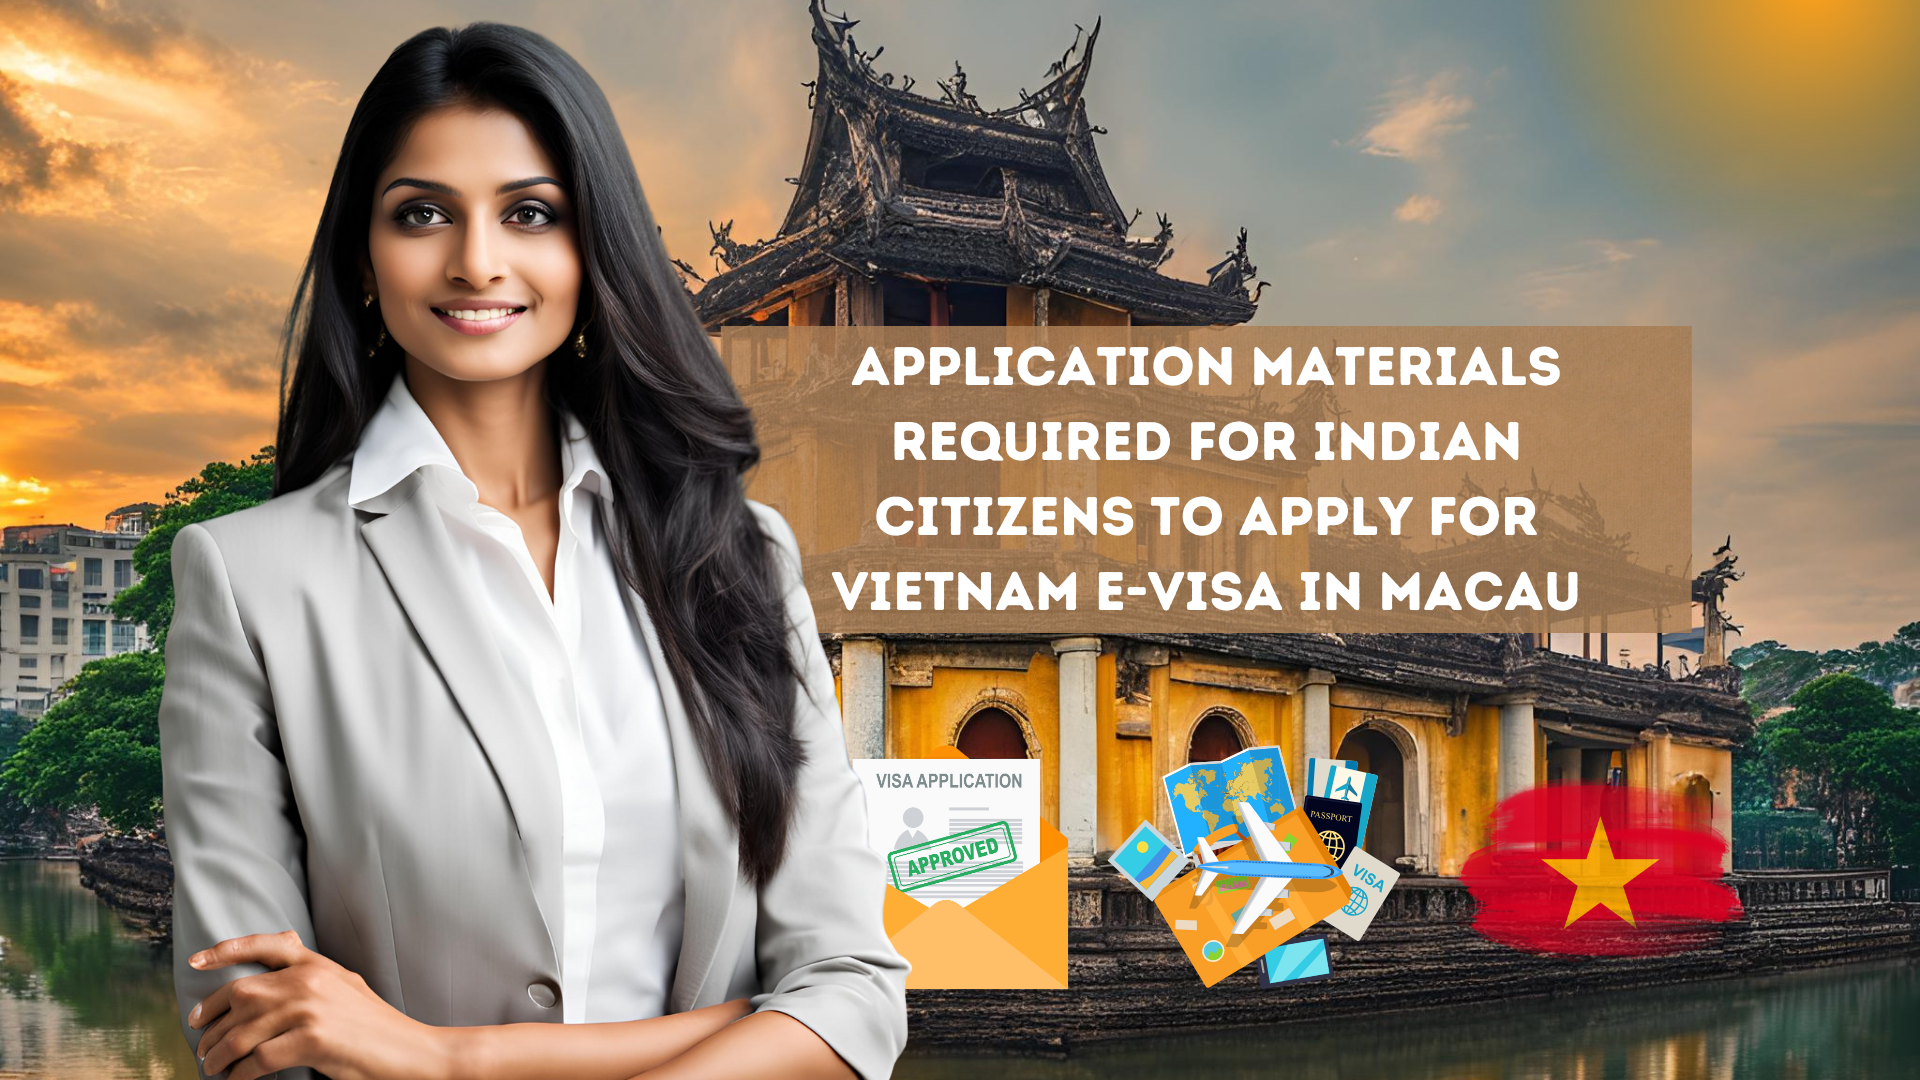 Application materials required for Indian citizens to apply for Vietnam e-visa in Macau